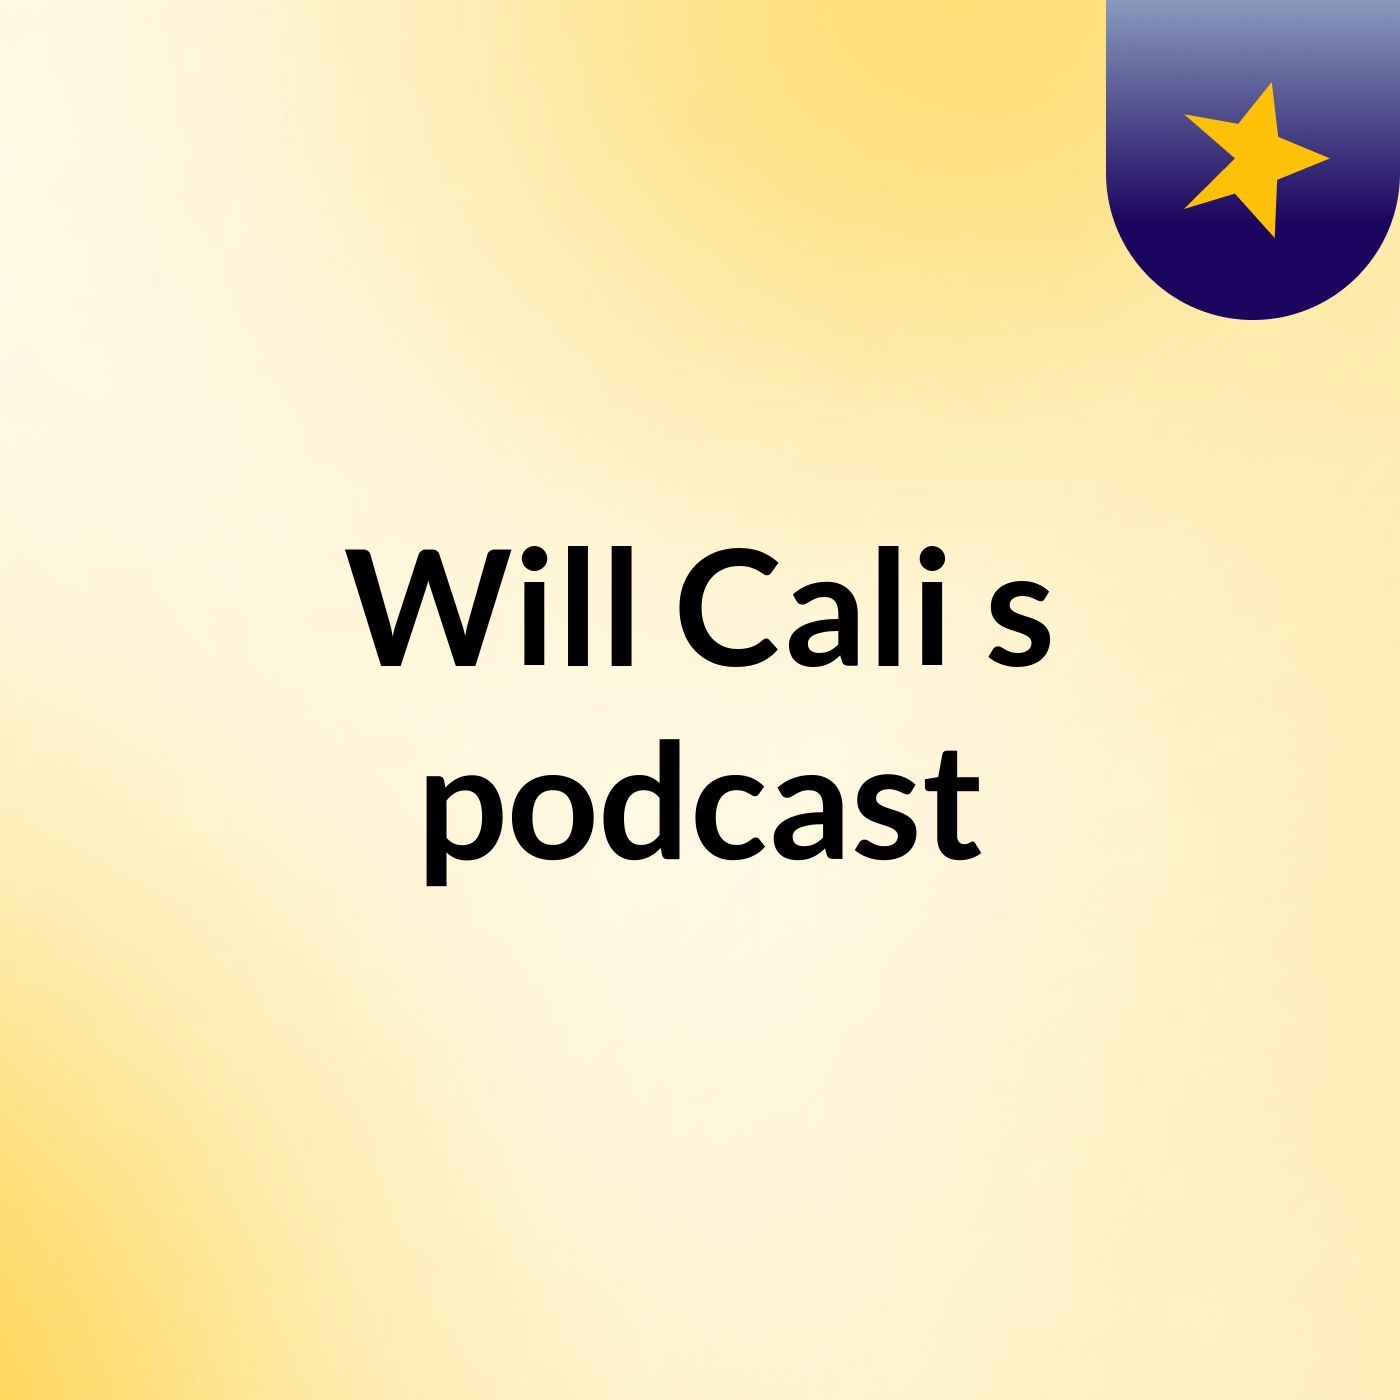 Episode 3 - Will Cali's podcast